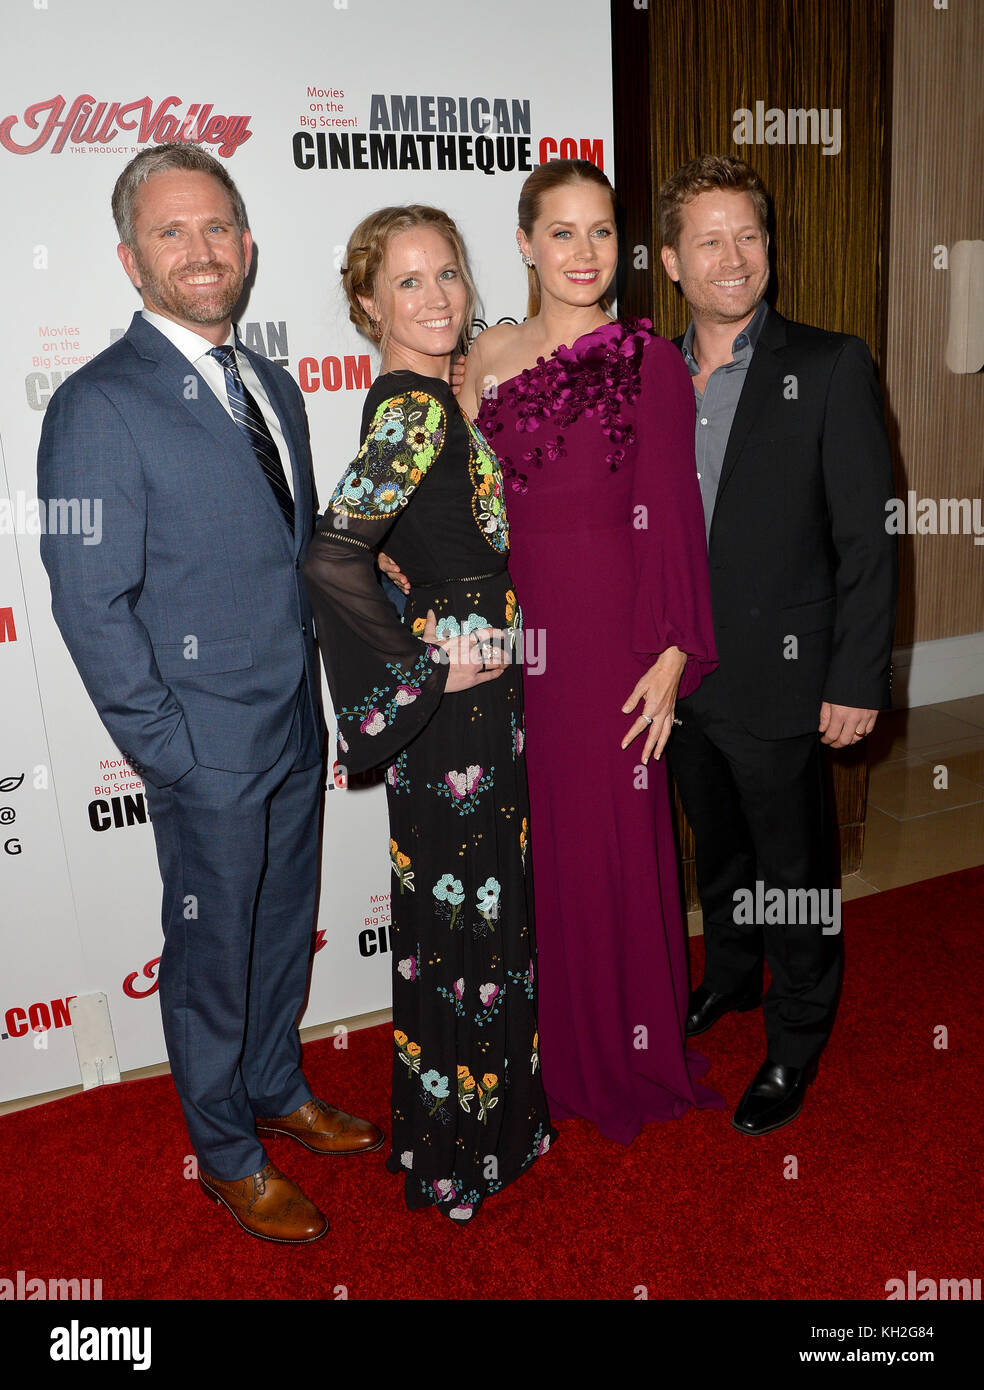 BEVERLY HILLS, CA. November 10, 2017: Amy Adams & sister AnnaMarie & brothers Dan & Eddie at the American Cinematheque 2017 Award Show at the Beverly Hilton Hotel Picture: Sarah Stewart Stock Photo